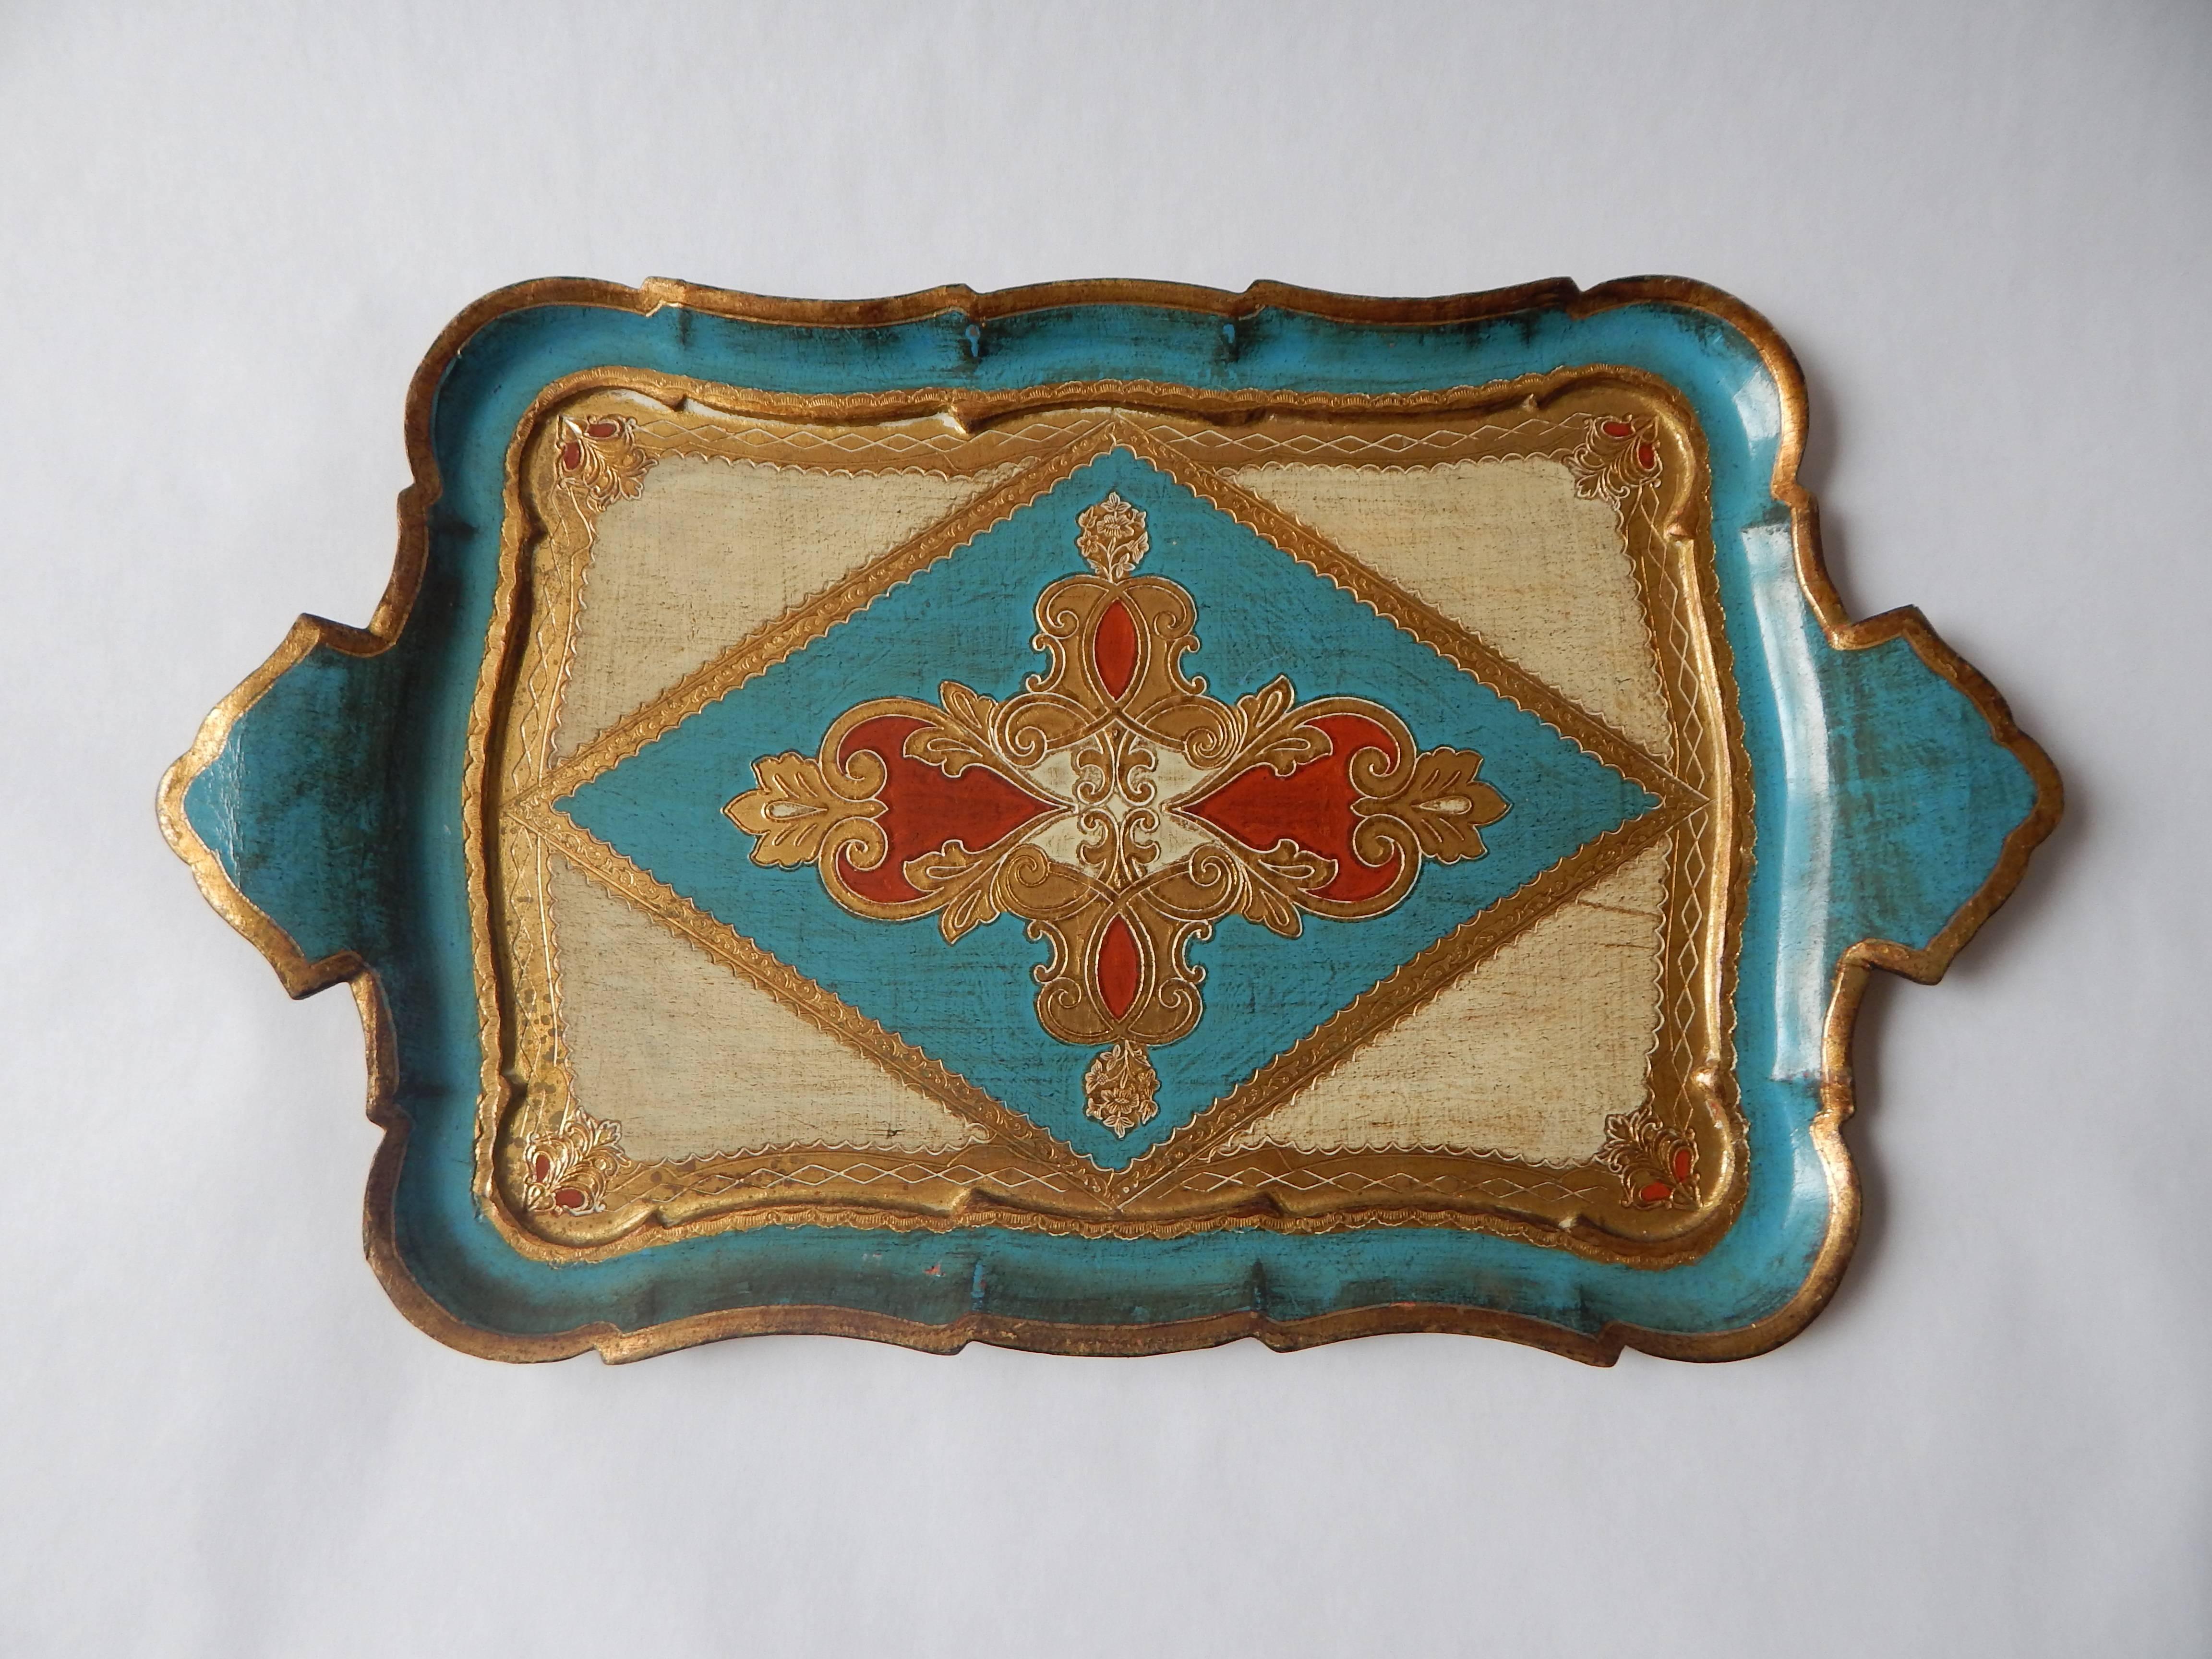 Two markings, florence, made in Italy. Made by Gabbinni, Florence, Italy. Gilded painted tray.